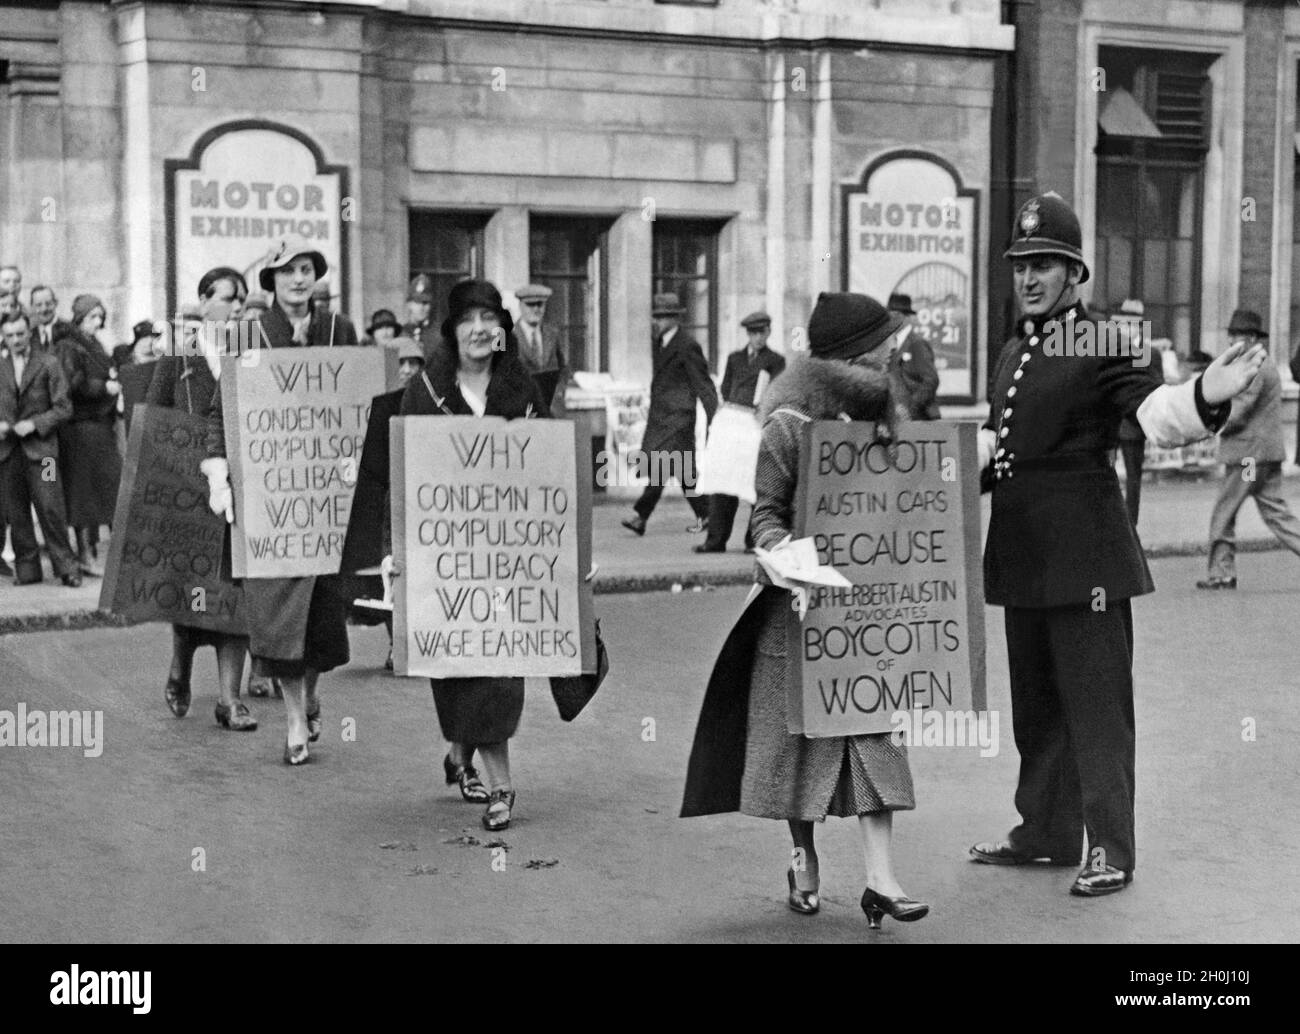 'A policeman regulates the traffic in front of the entrance to the ''Motor Exhibition'' at the Olympia in London and allows the demonstrators to cross the street. The women demonstrate with placards for fairer wages and working conditions and call for a boycott of Sir Herbert Austin. [automated translation]' Stock Photo